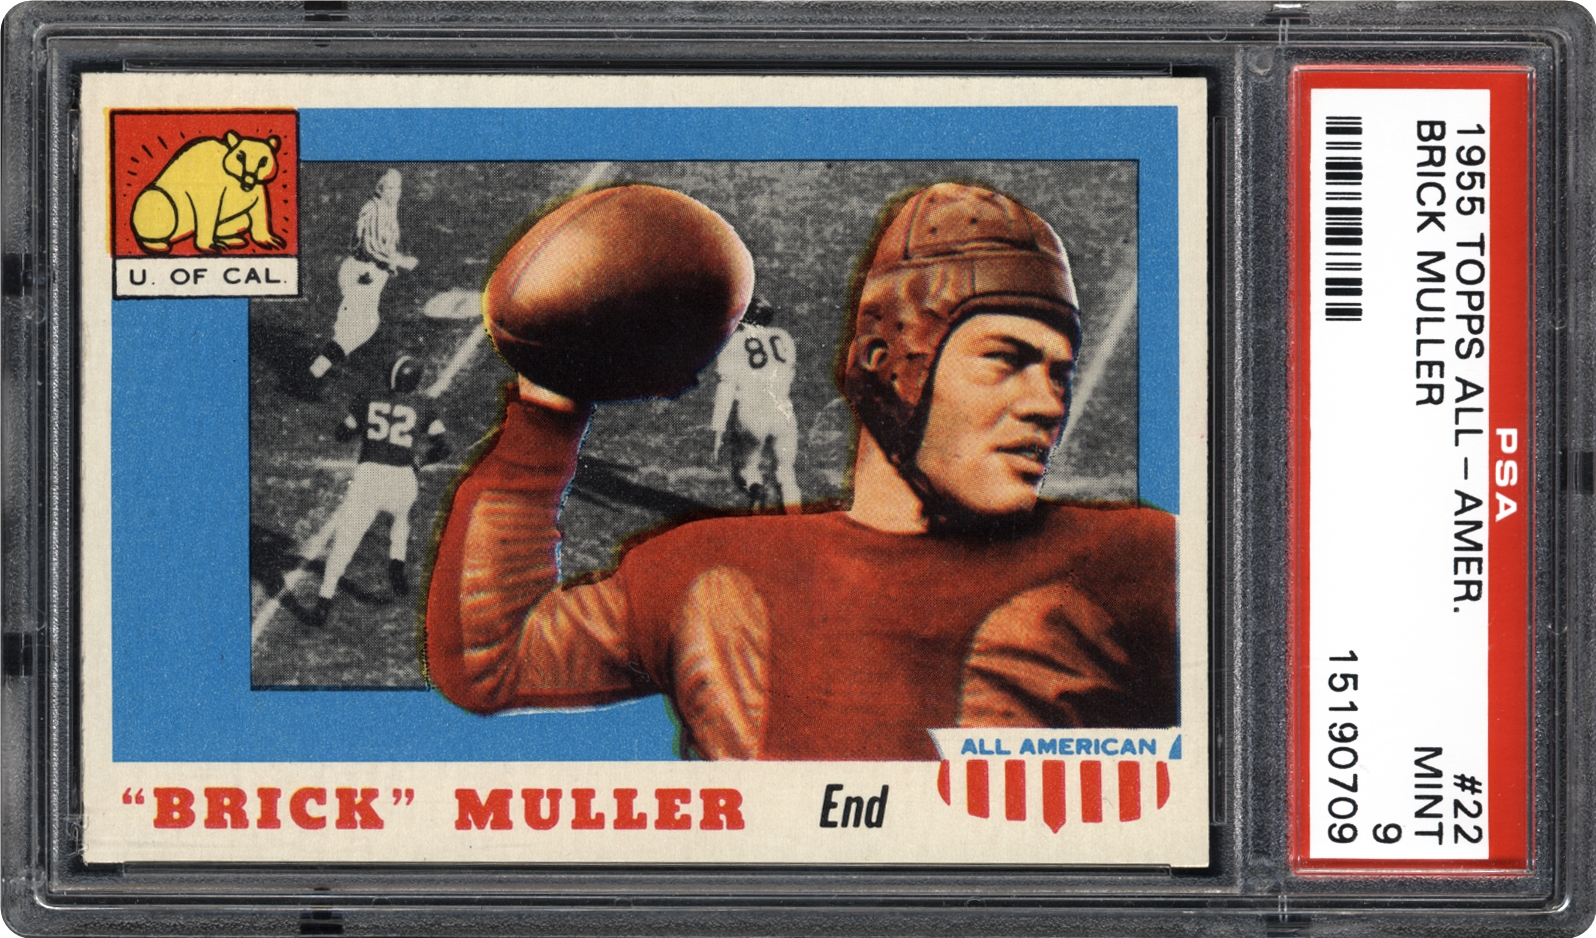 Muller was featured in the 1955 Topps Chewing Gum All-Americans card set.